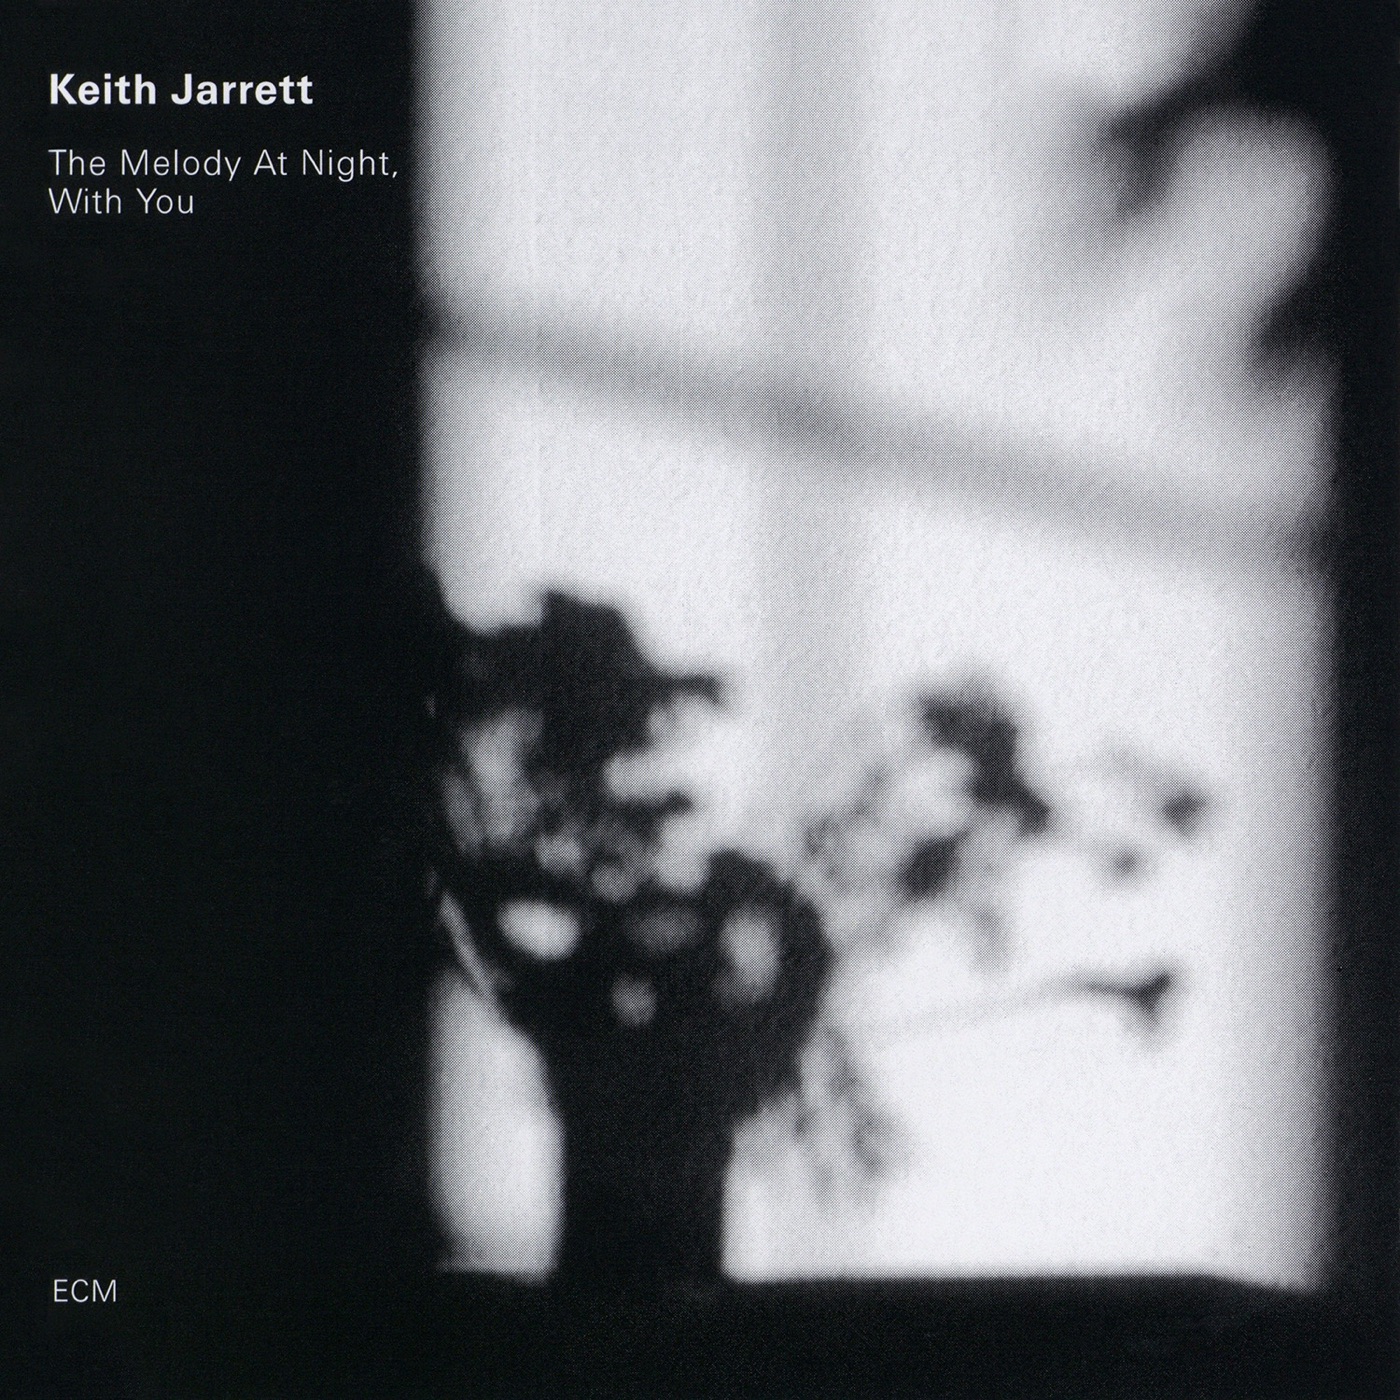 The Melody At Night, With You by Keith Jarrett